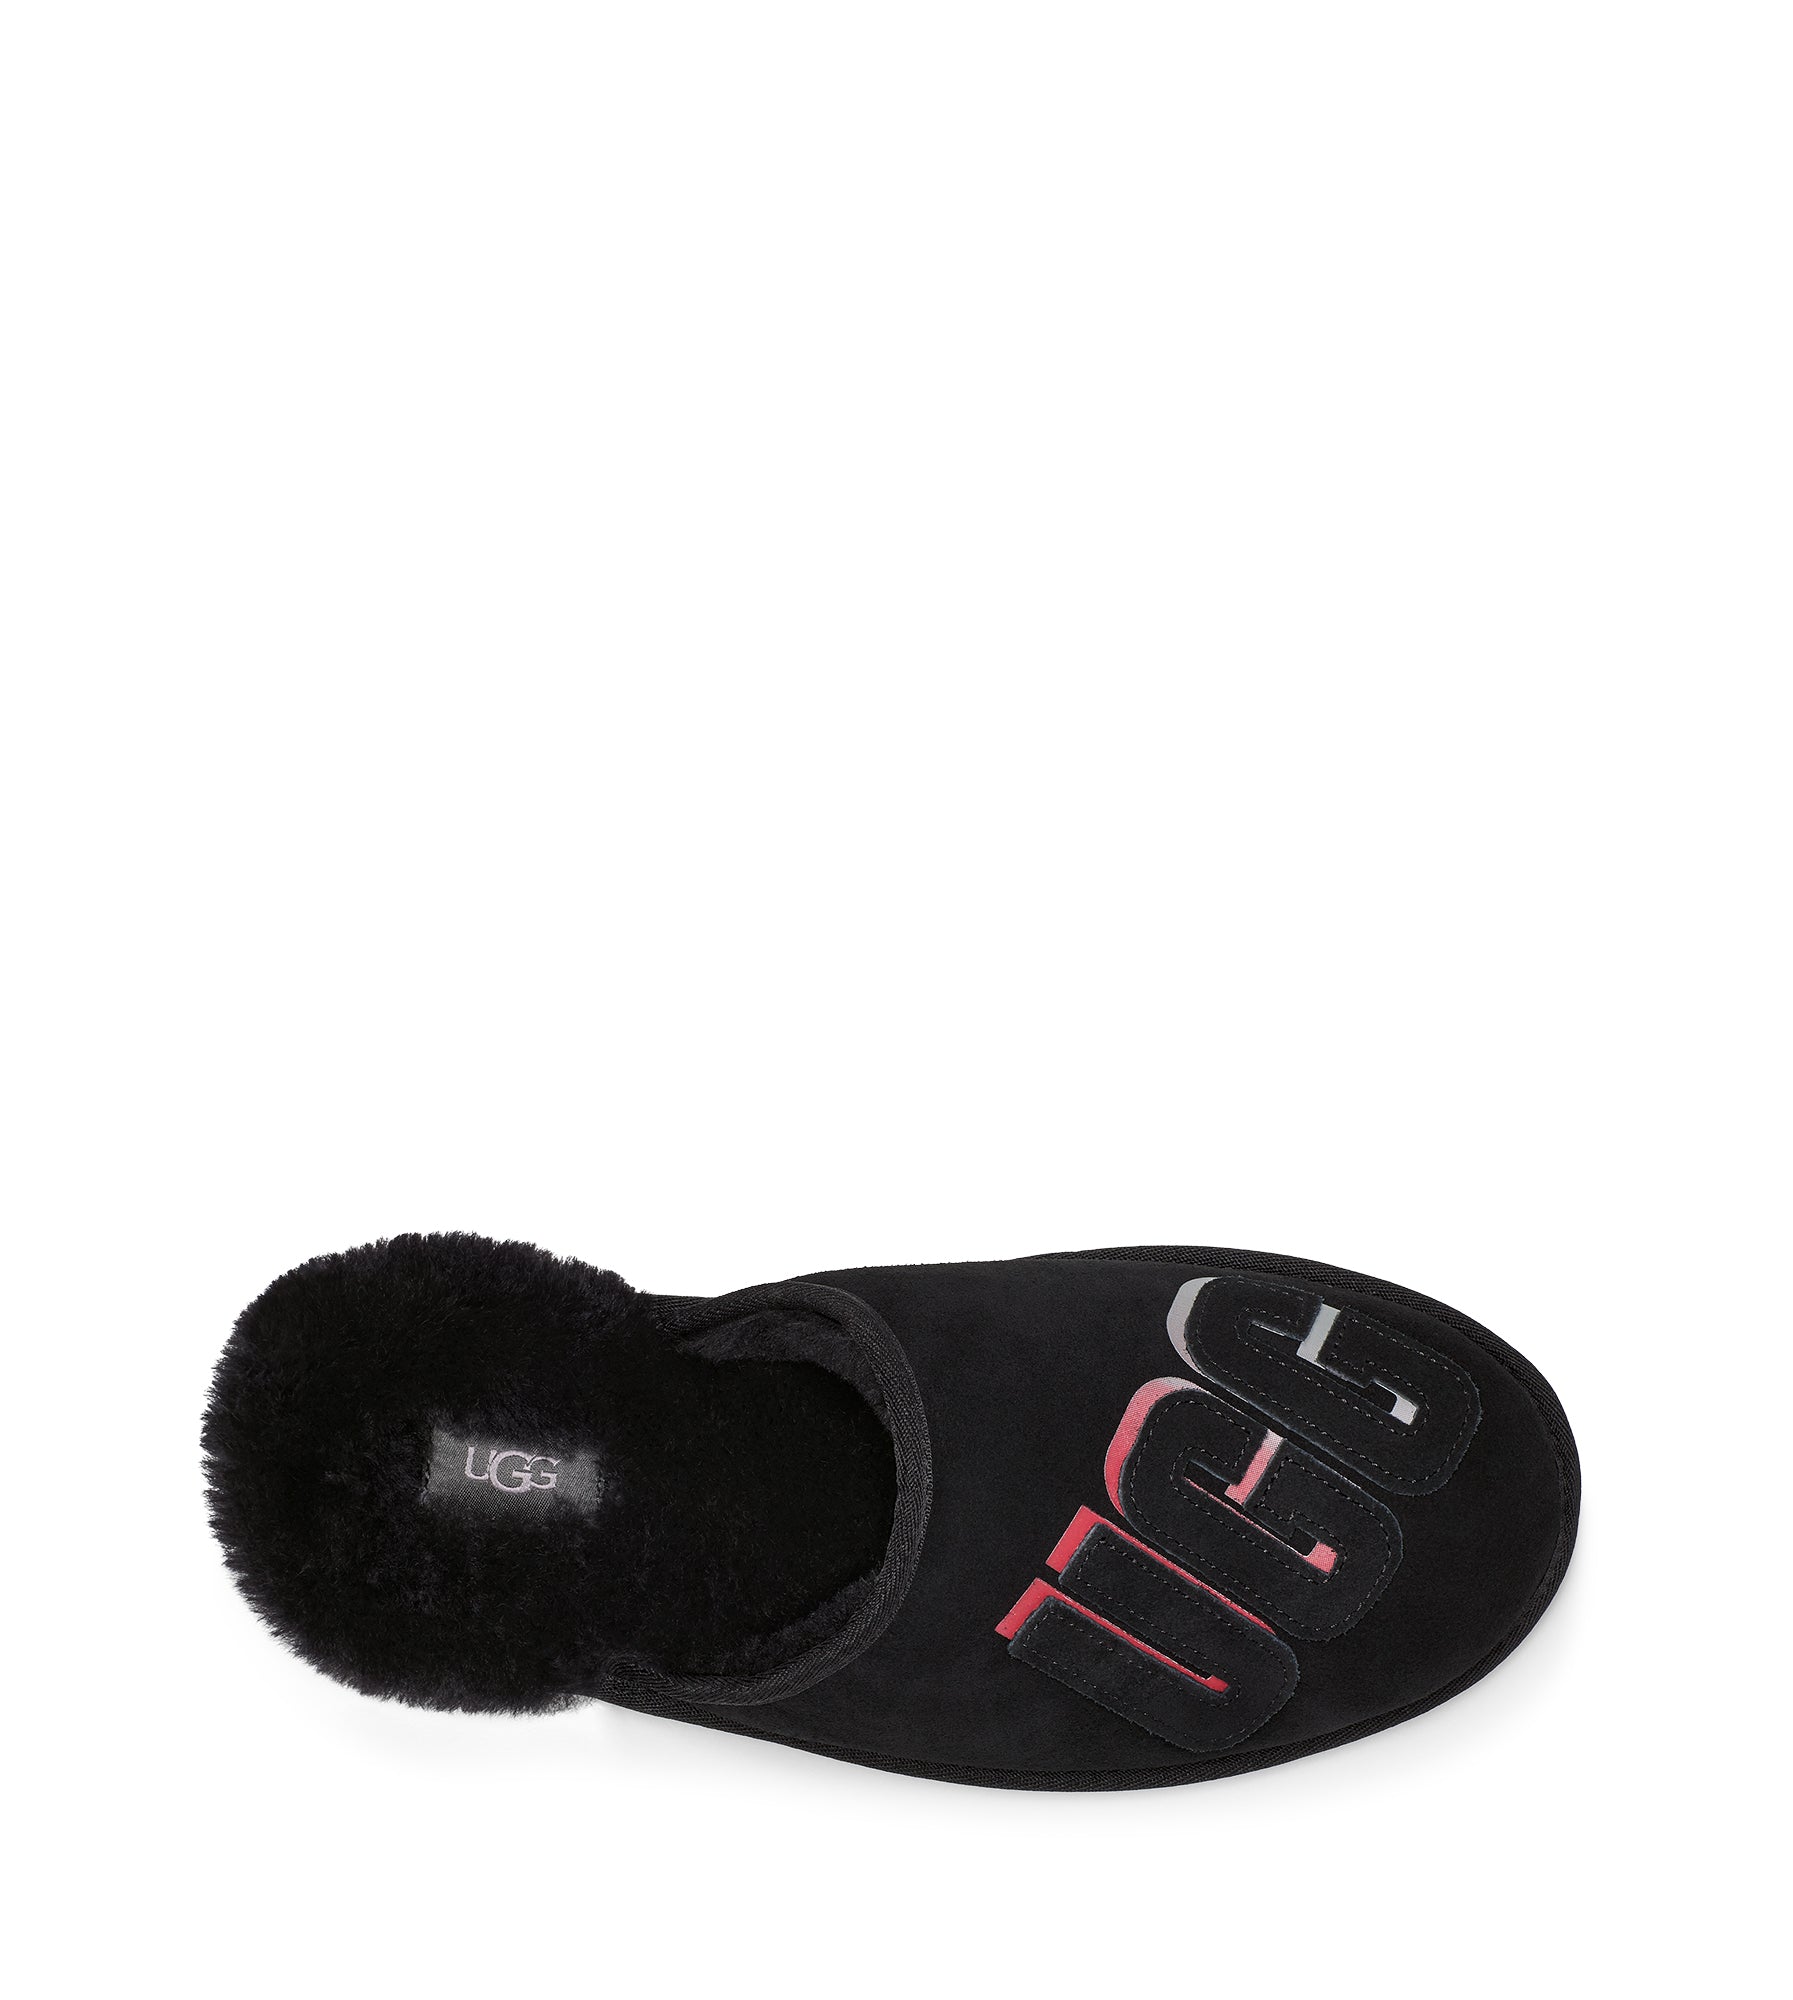 Sample UGG Scuff Graphic Slippers   